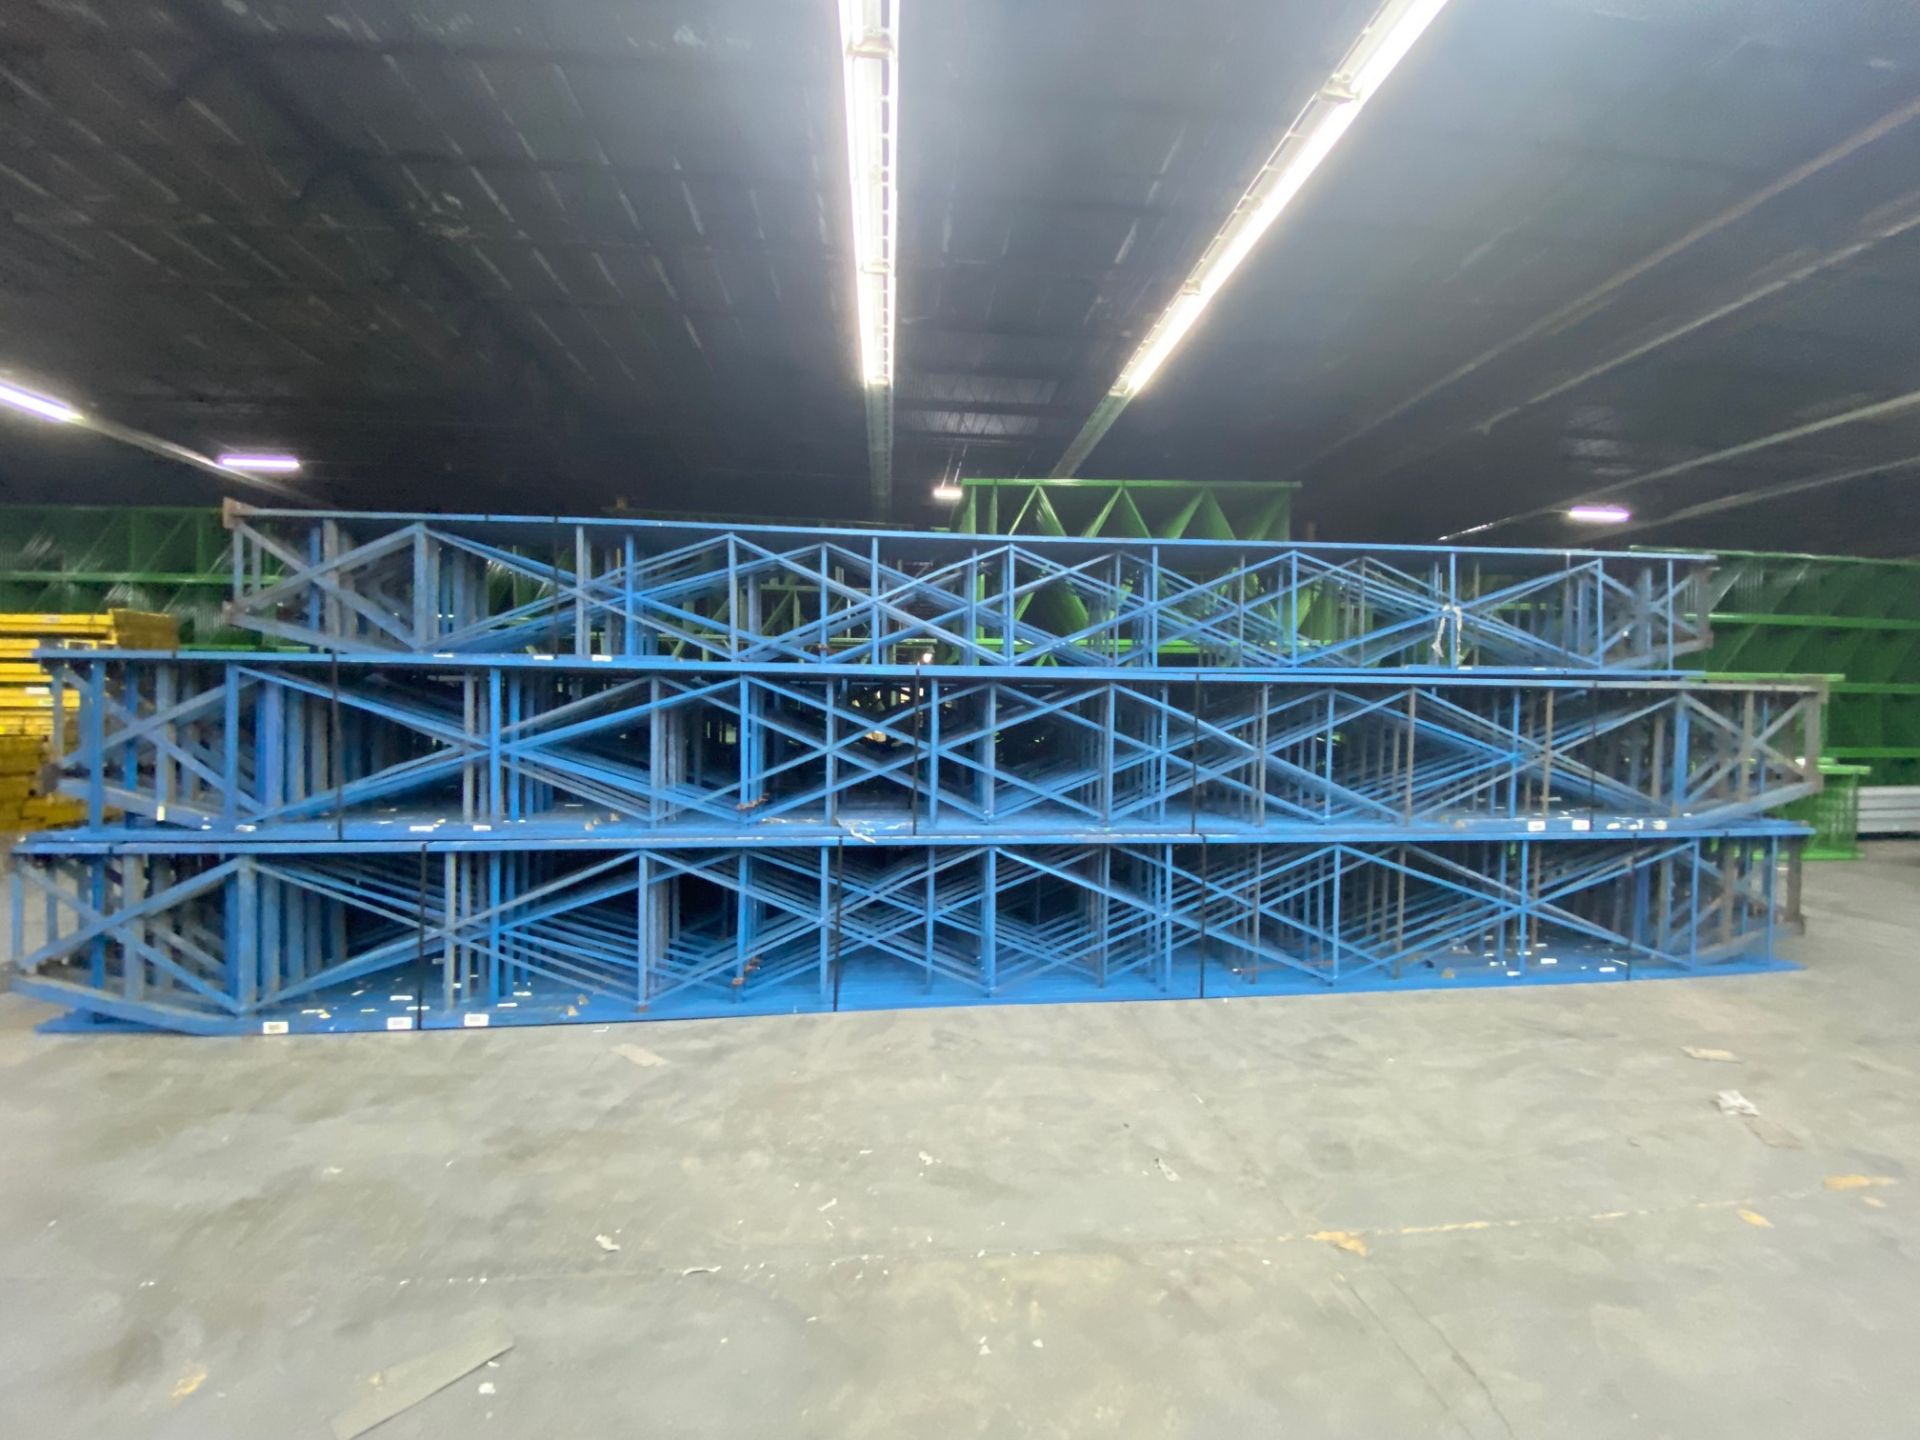 USED 60 PCS OF STRUCTURAL UPRIGHT. SIZE 30'H TO 33'H X 36"D, BLUE - Image 3 of 4